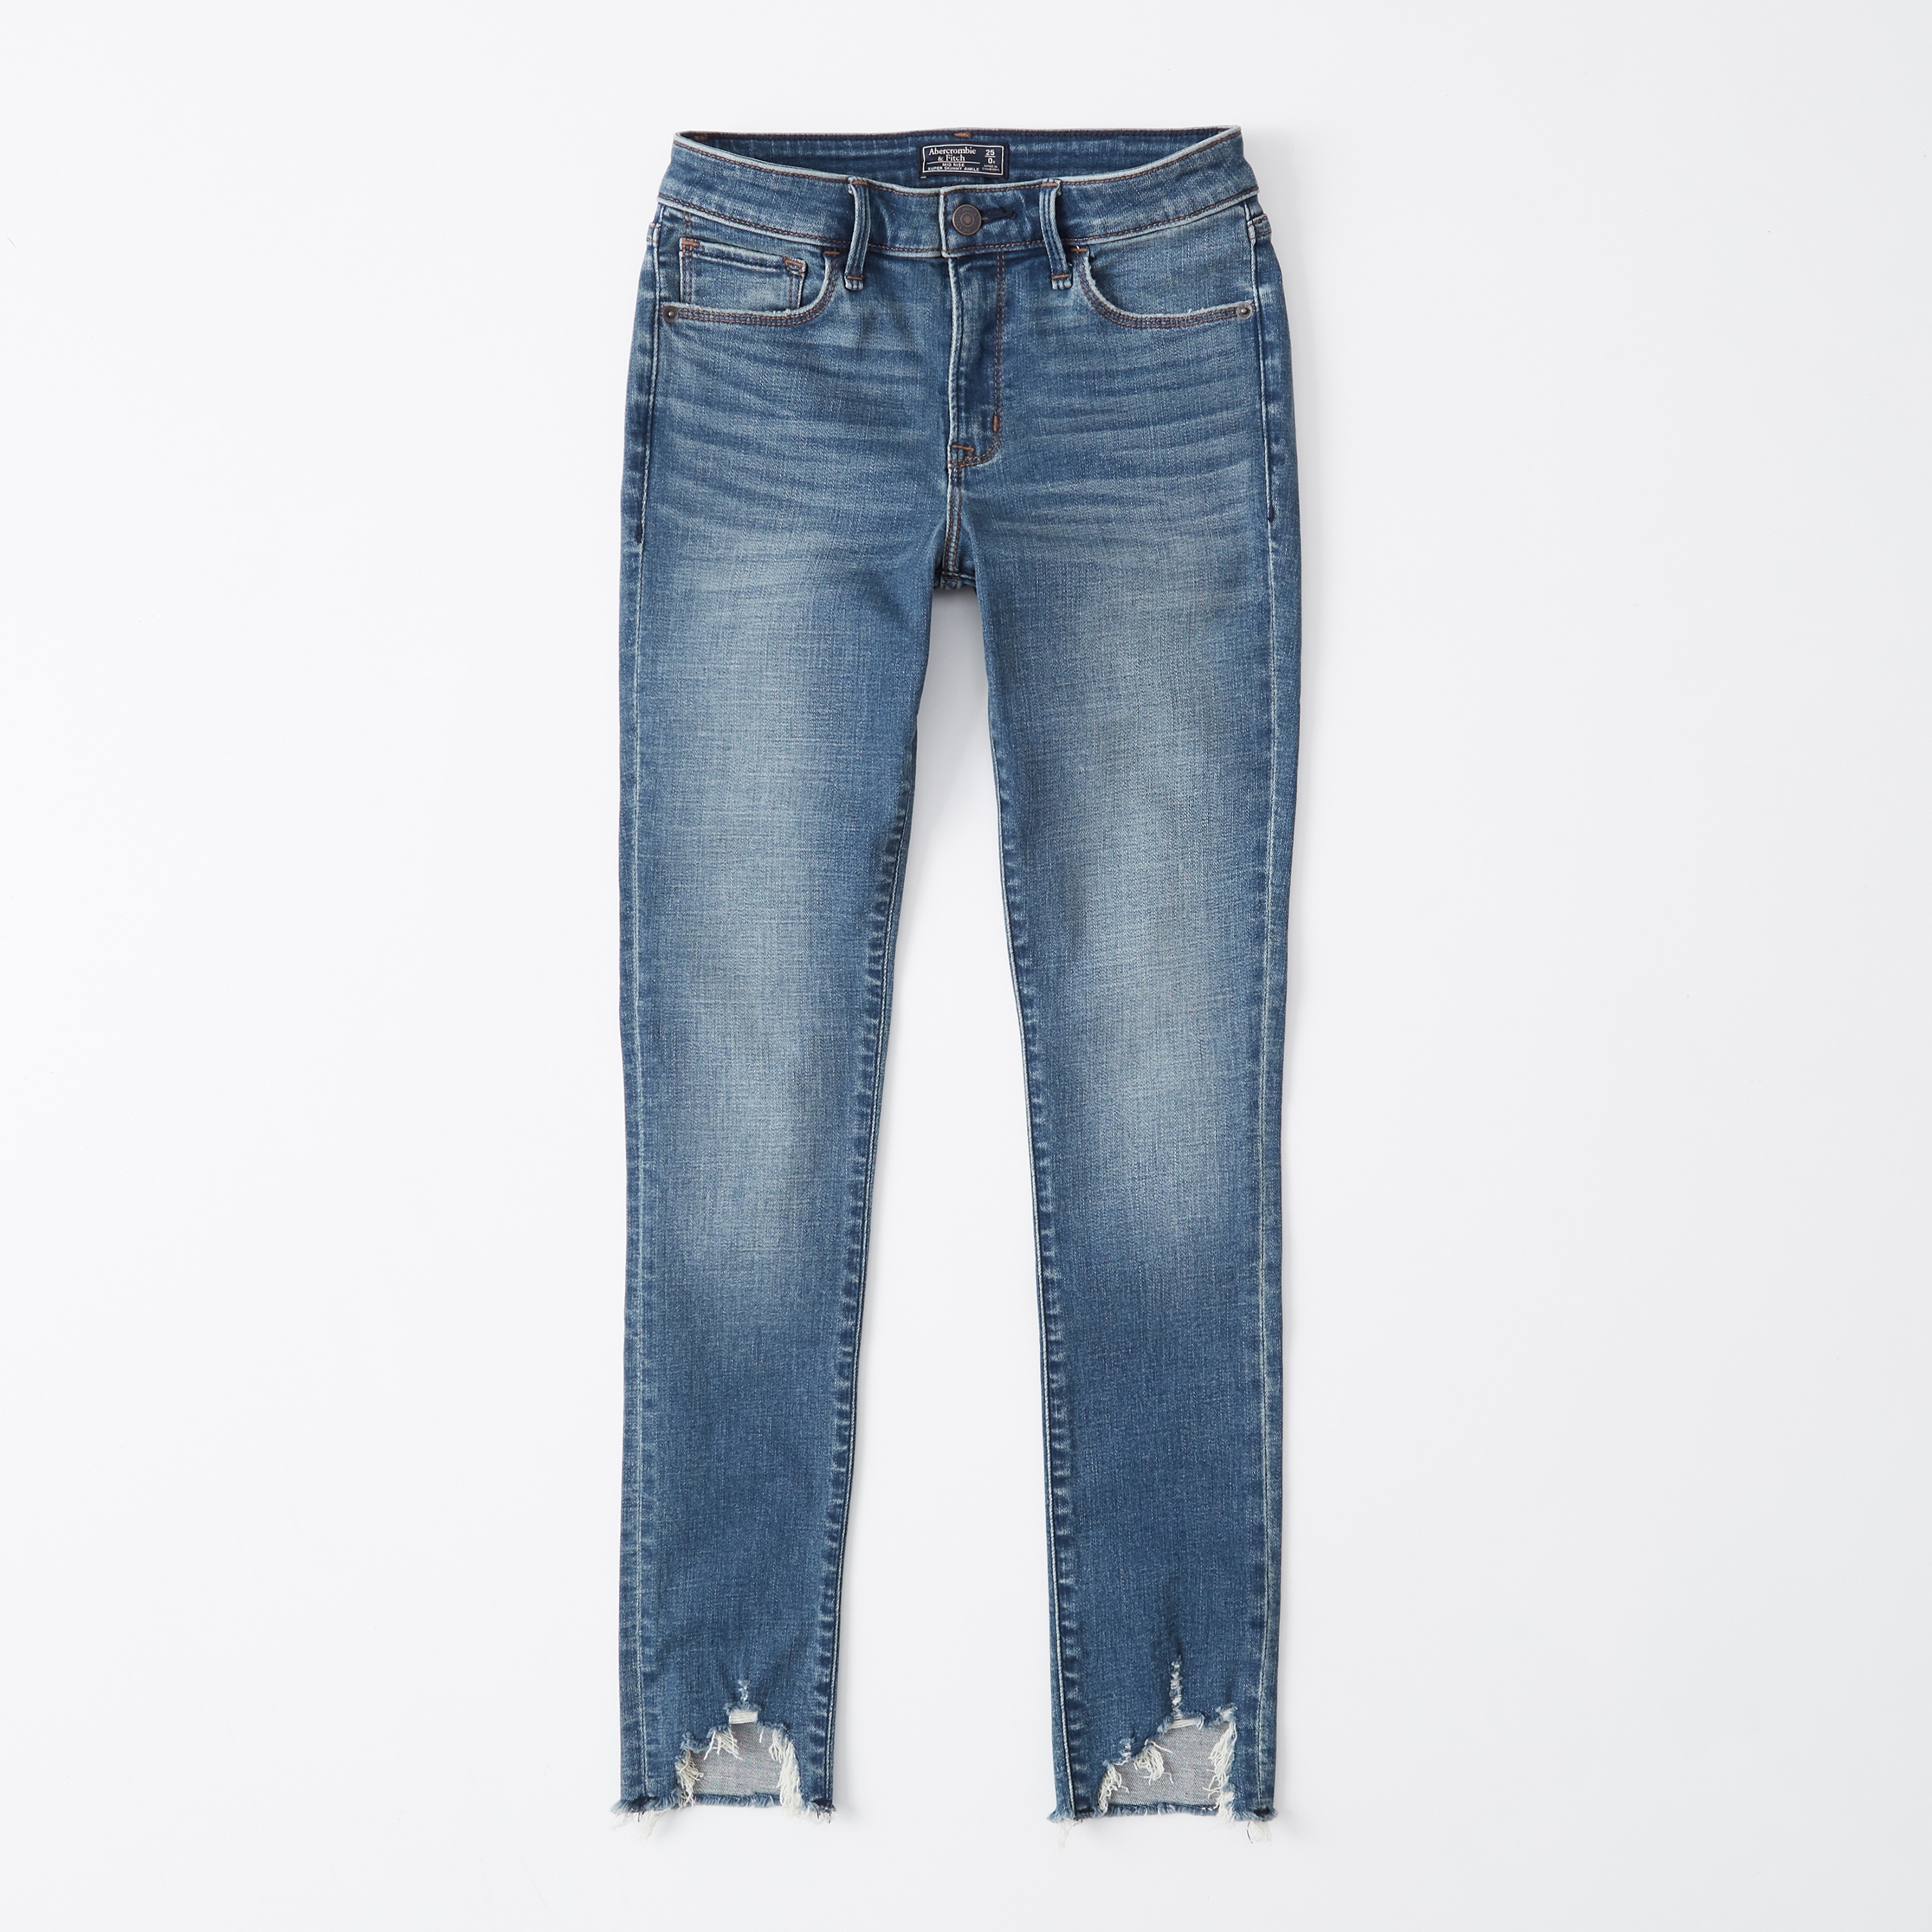 a&f mid rise super skinny ankle jeans